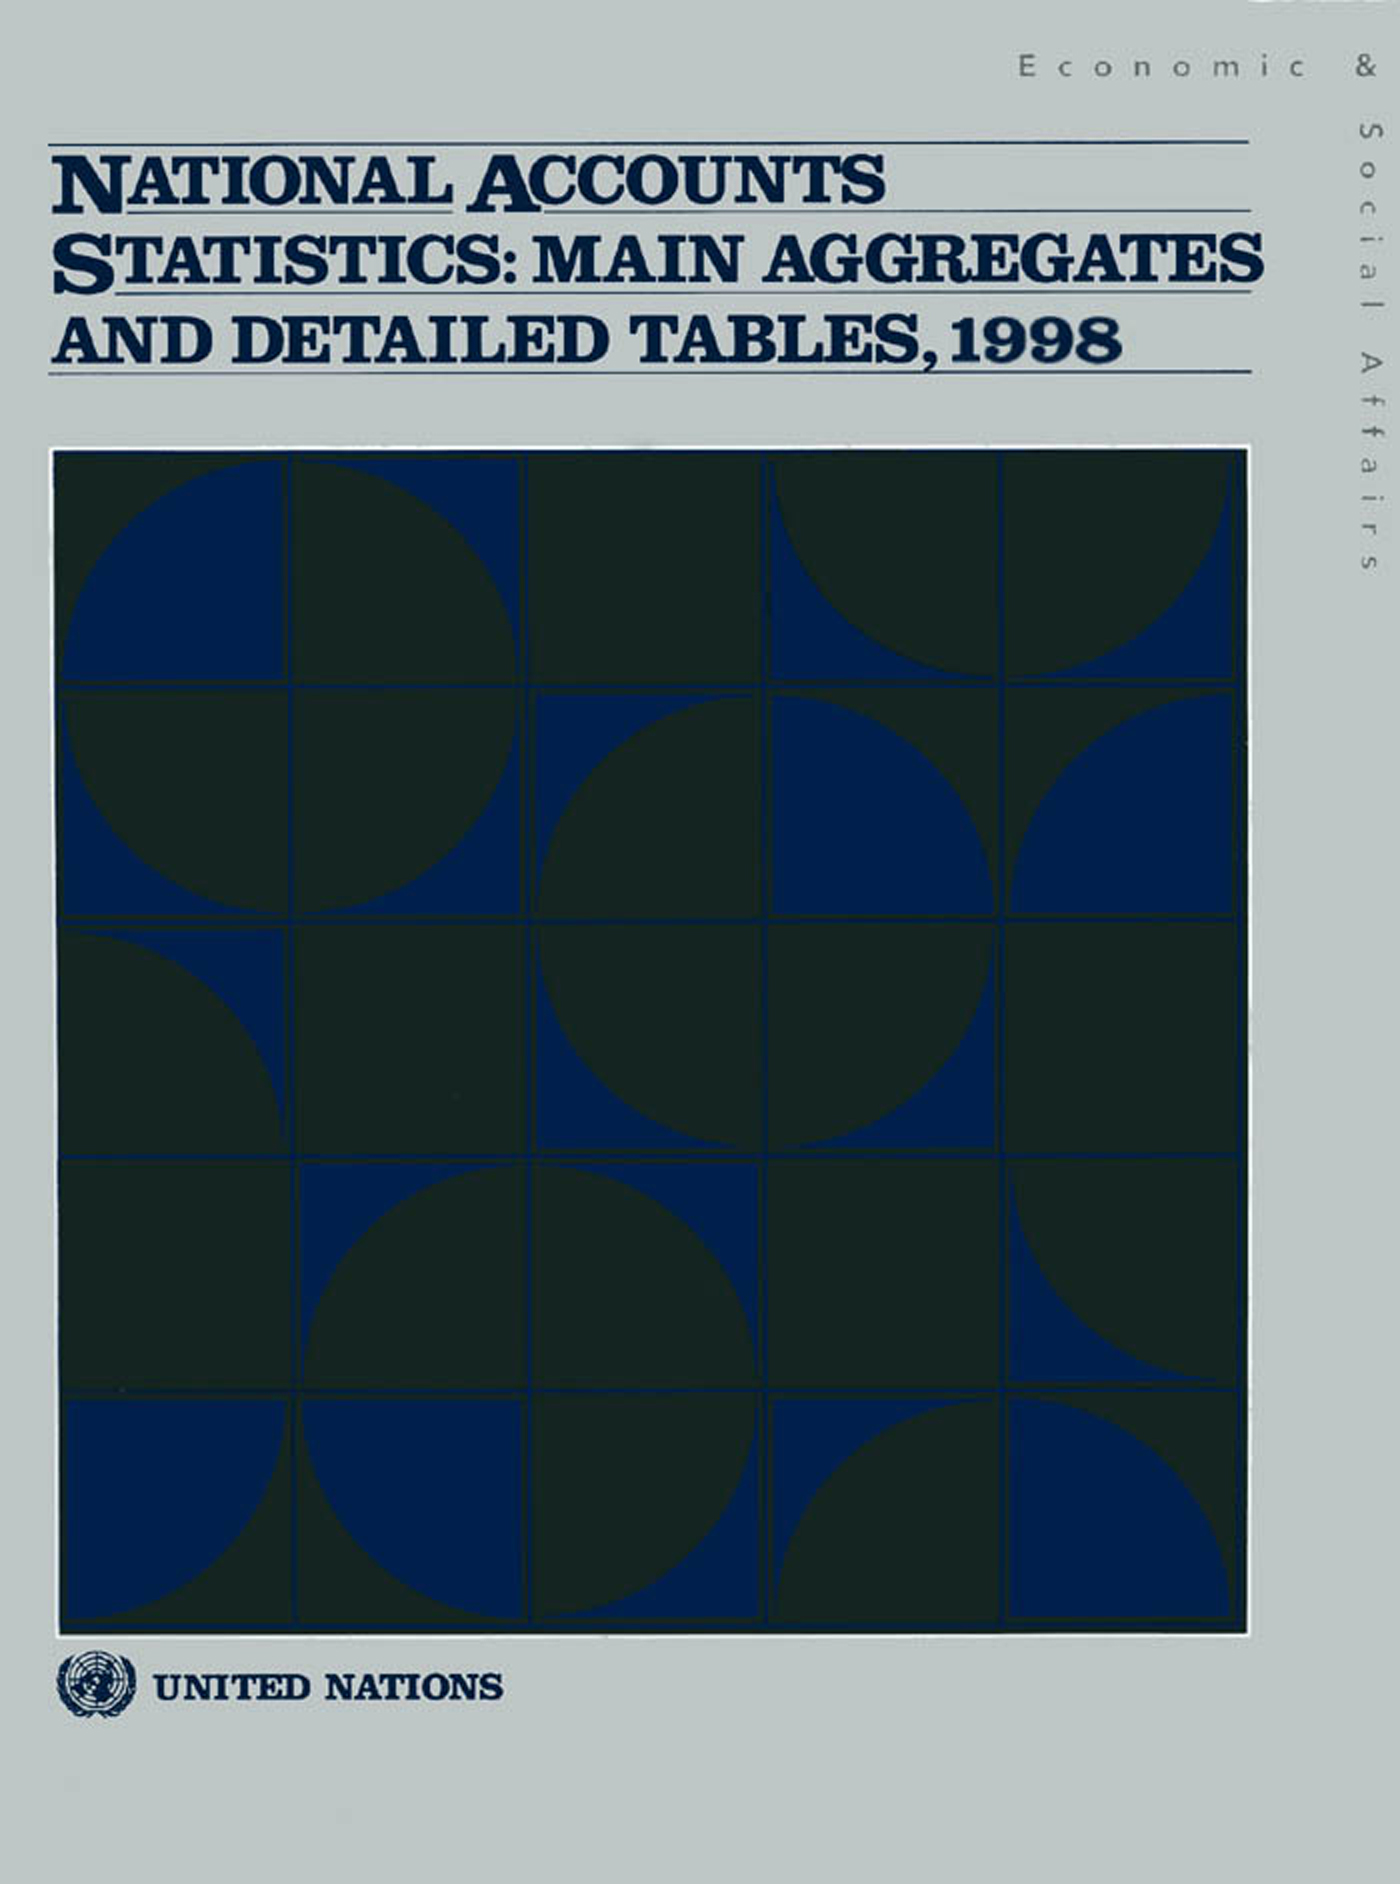 image of National Accounts Statistics: Main Aggregates and Detailed Tables 1998